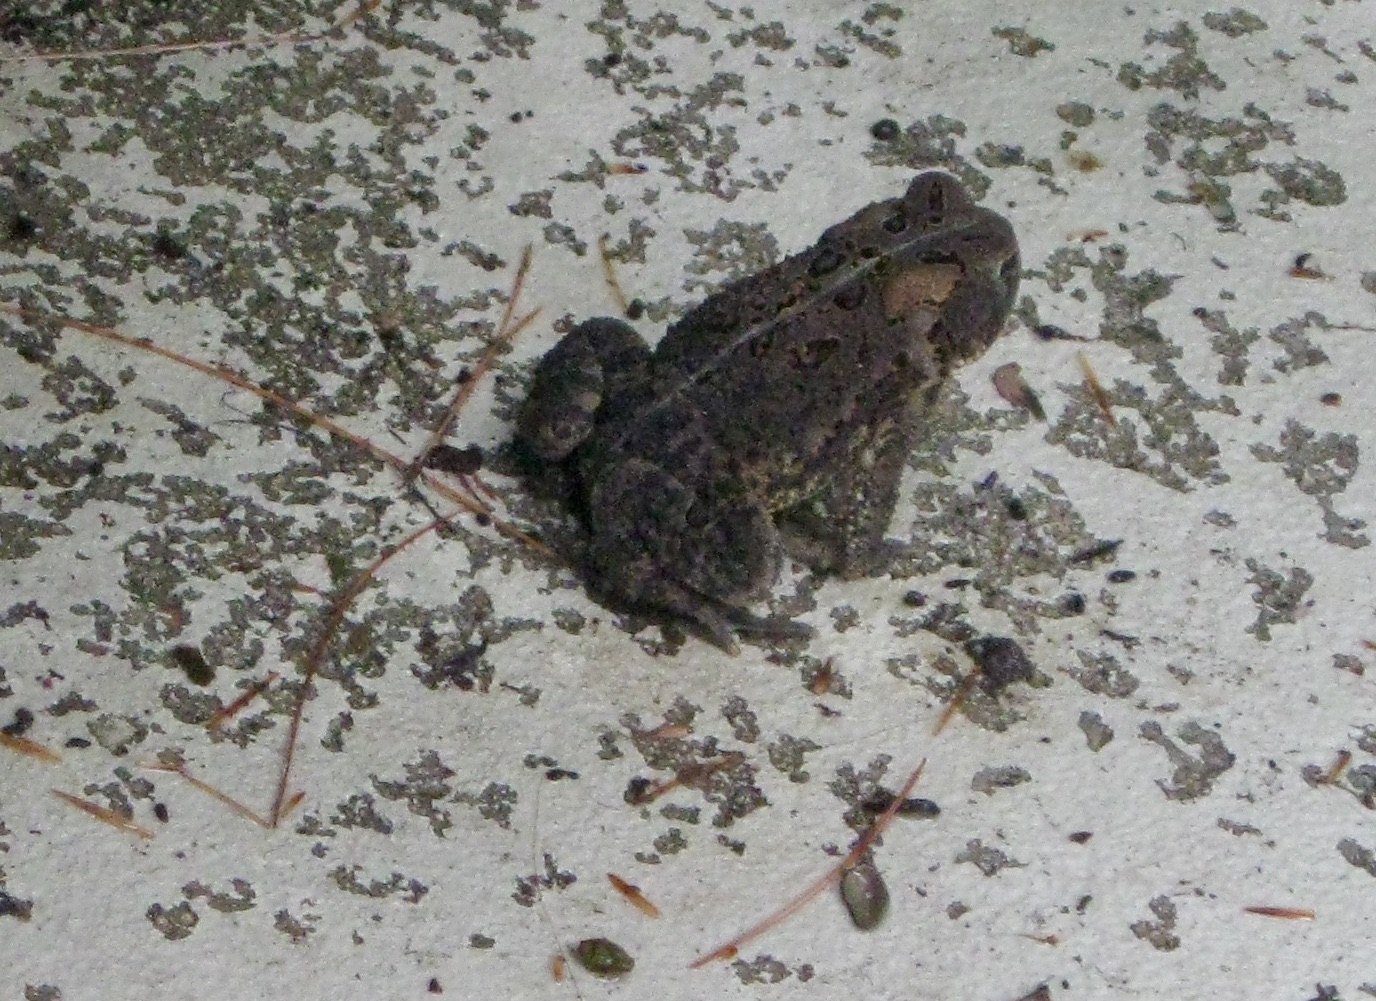 Eastern American Toad on a concrete patio. The toad is mottled gray-freen and dark brown, with many small bumps on its back, and a lighter gray vertical stripe down the middle of its back. 